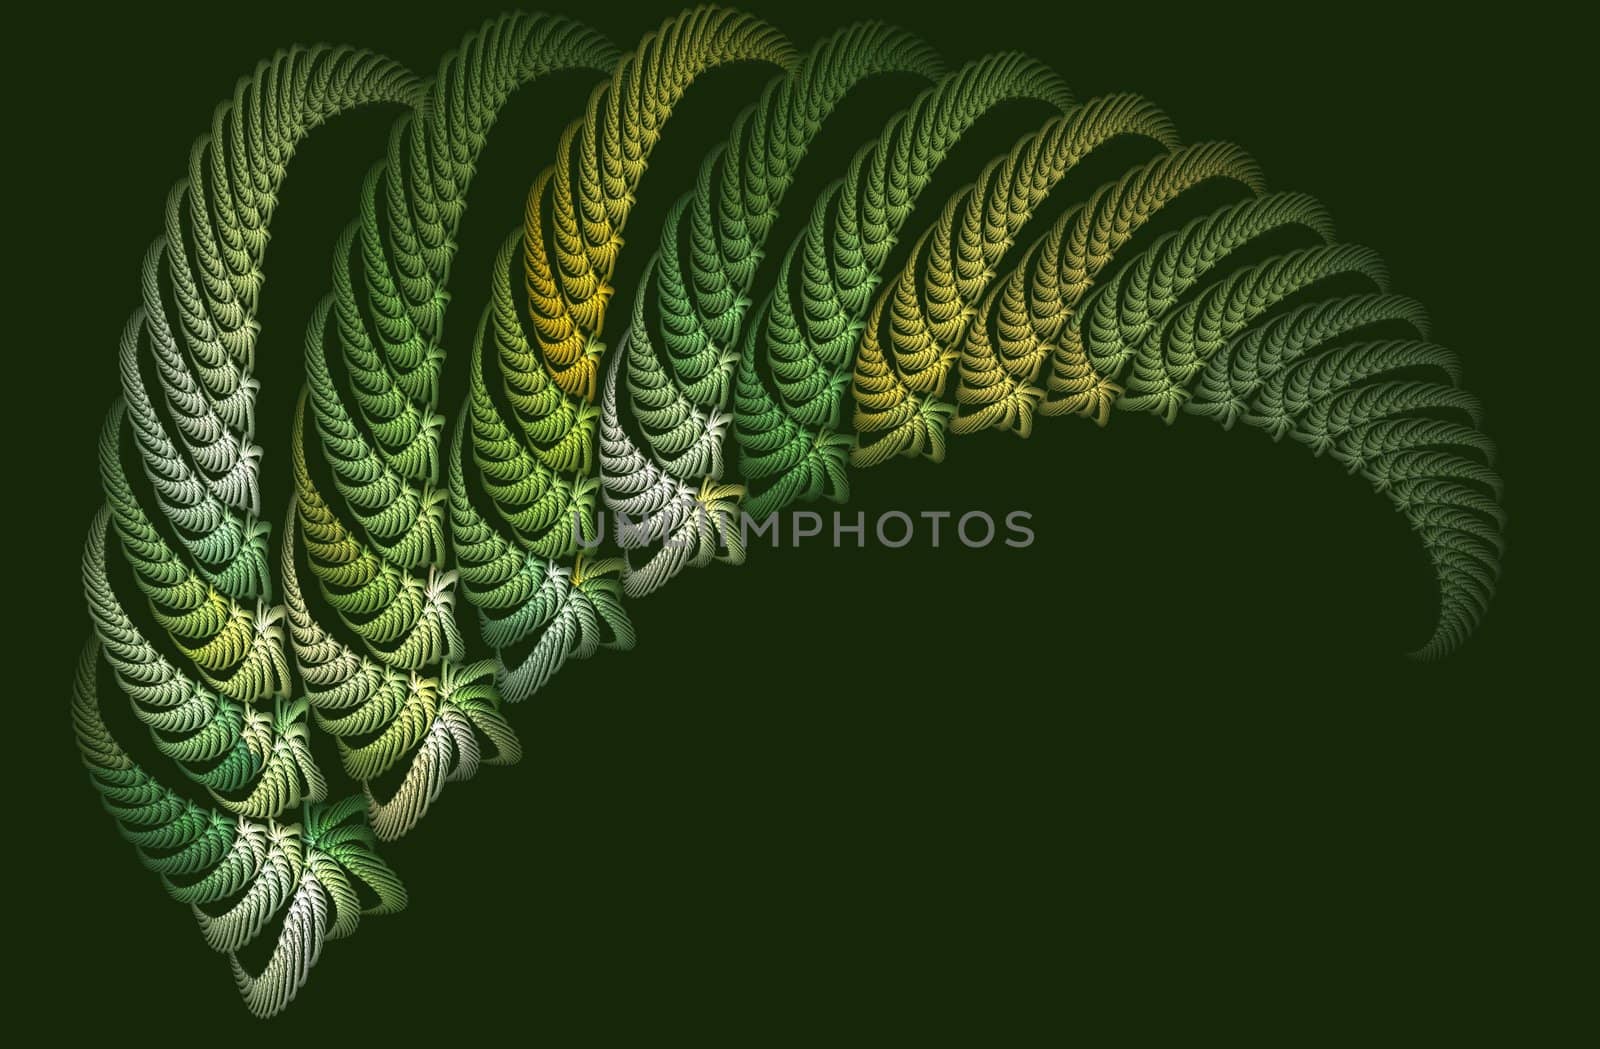 a repeating fractal rendering resembling a fern leaf